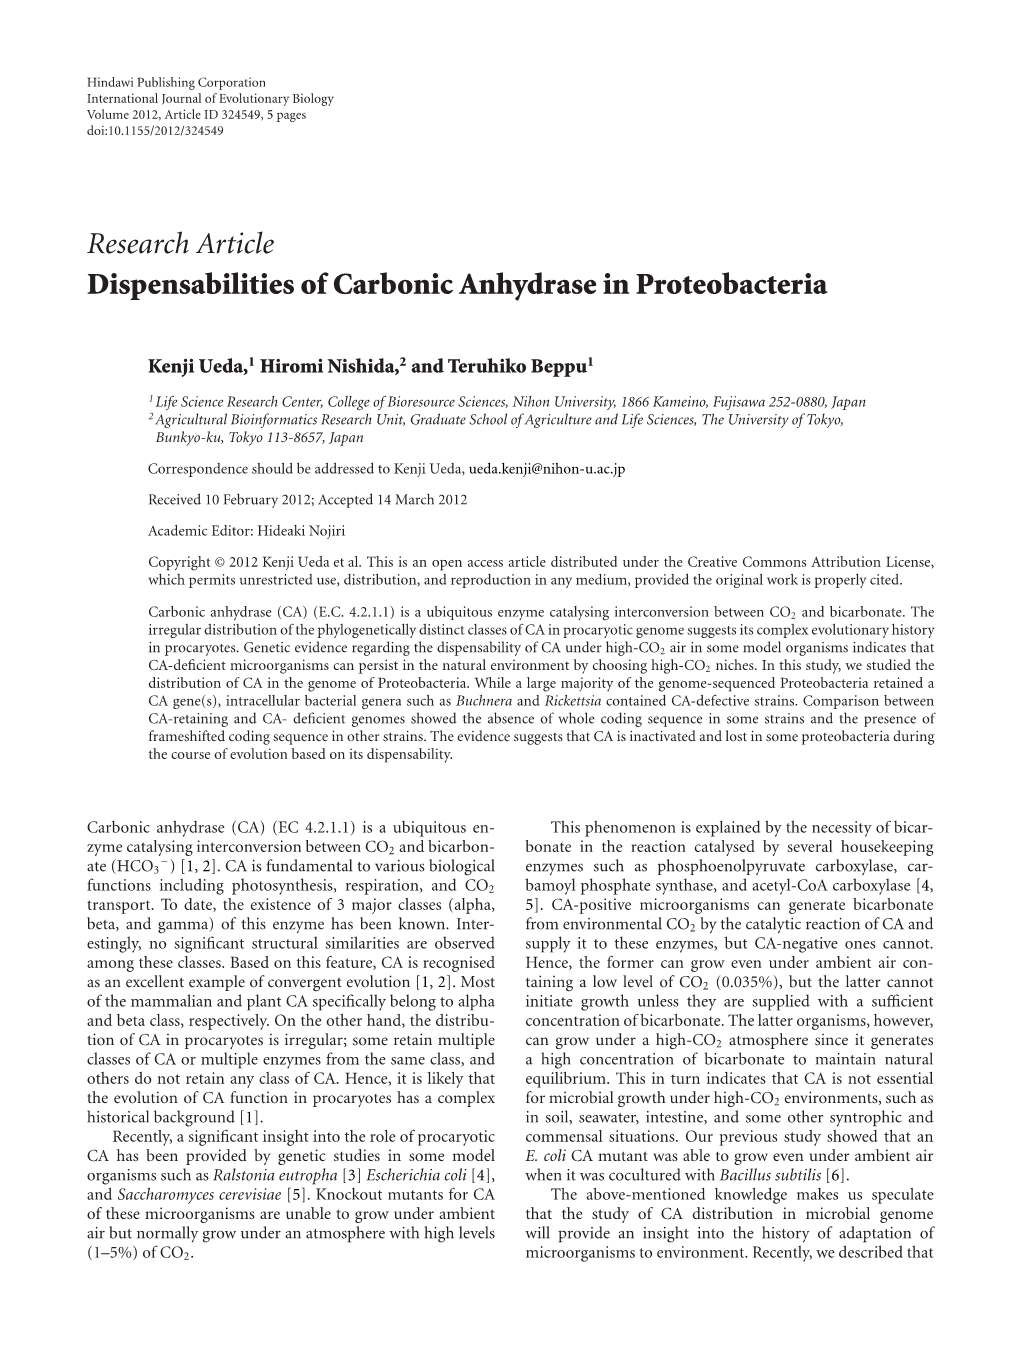 Dispensabilities of Carbonic Anhydrase in Proteobacteria